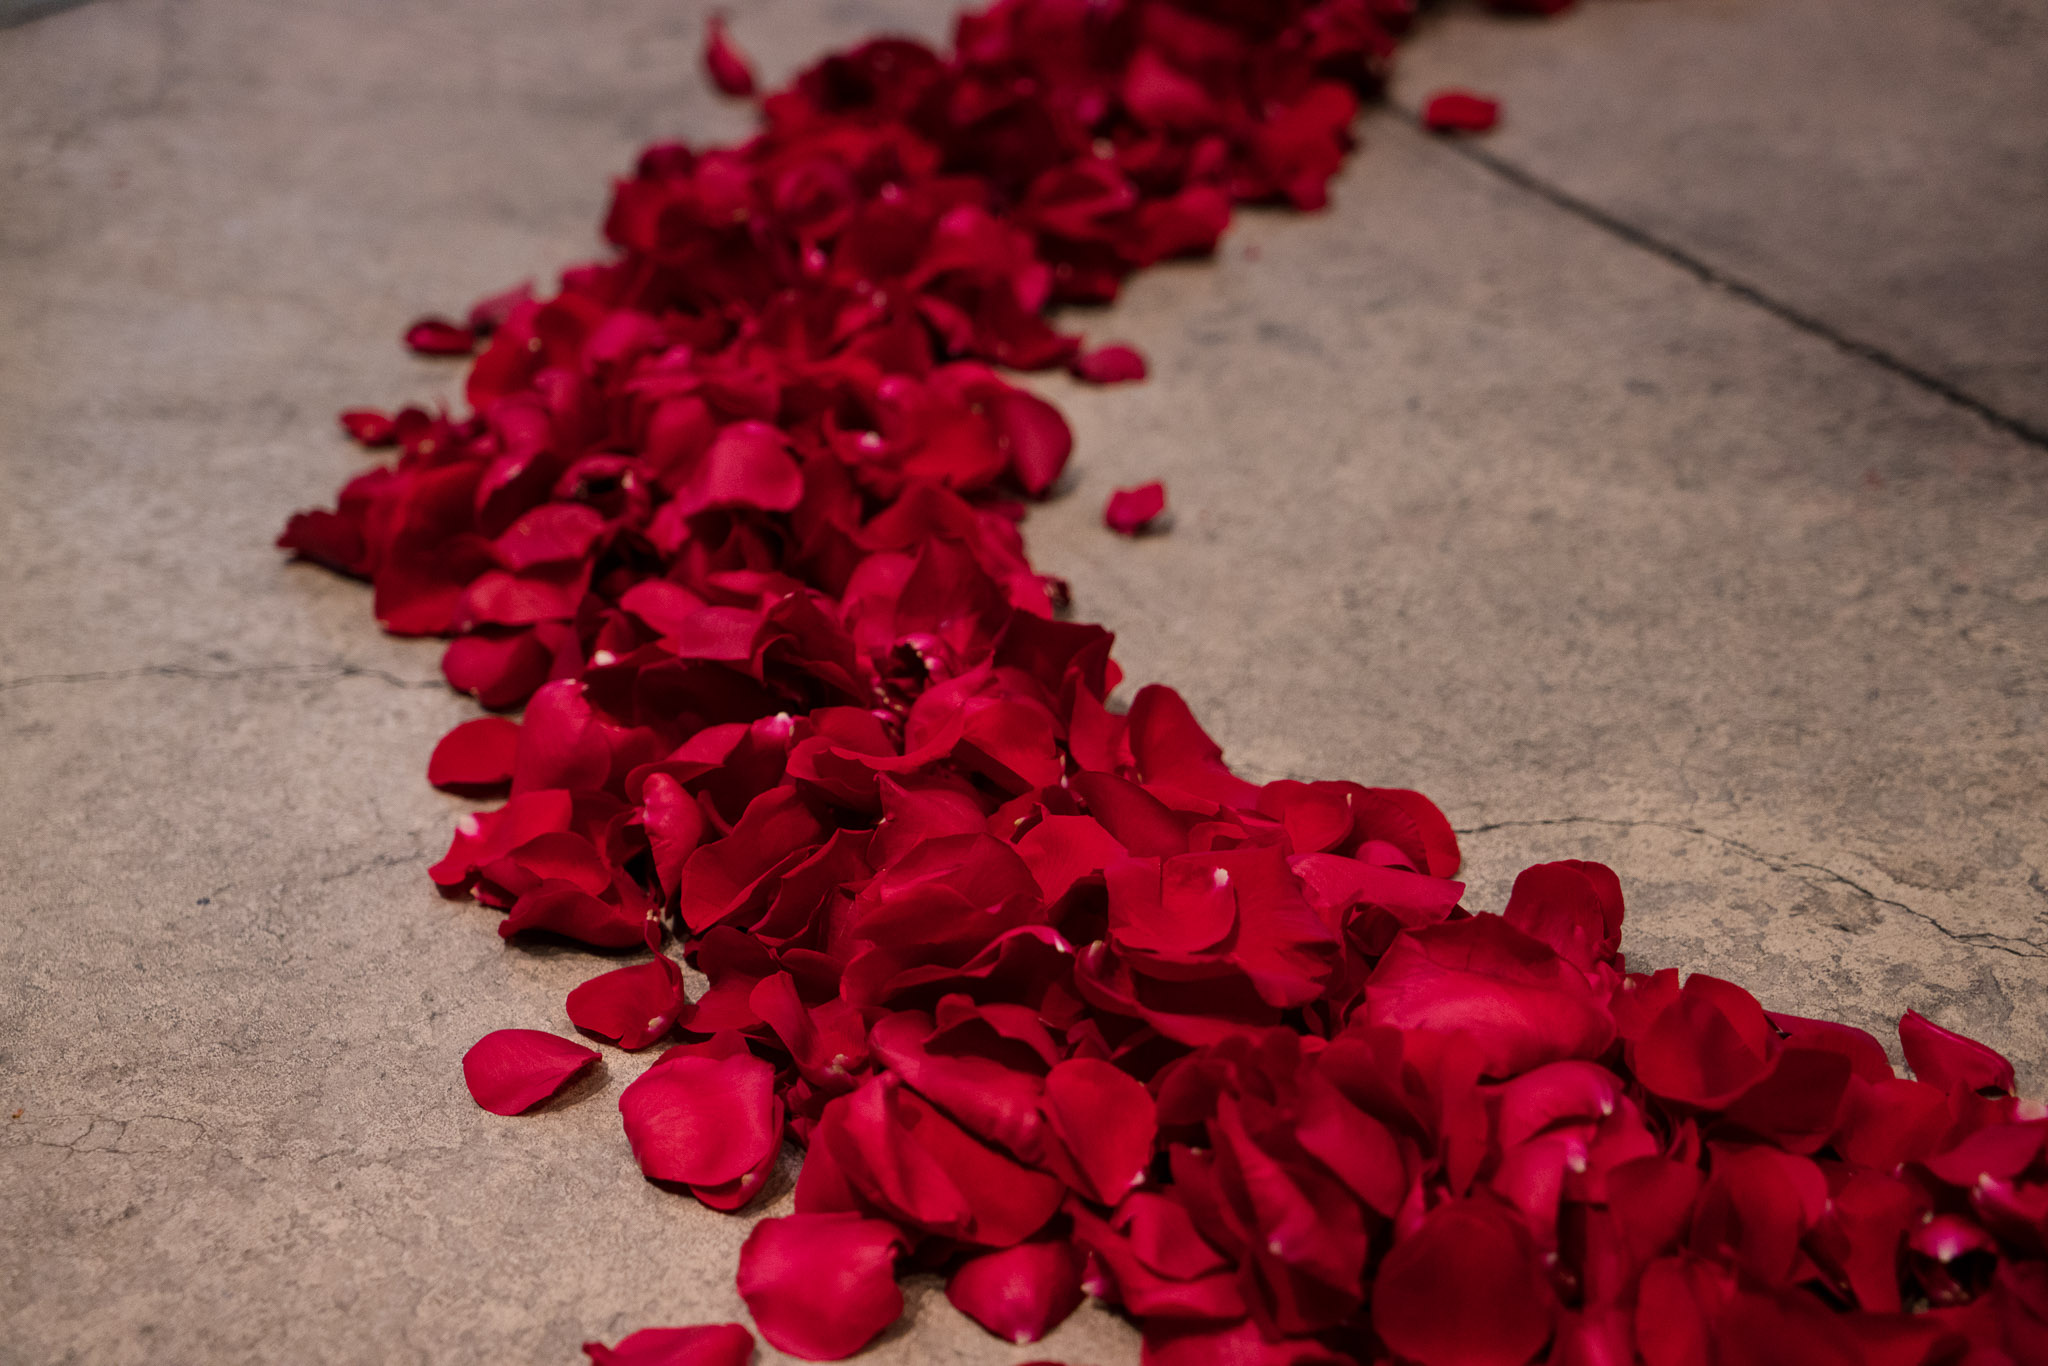 Rose petal path for romantic marriage proposal